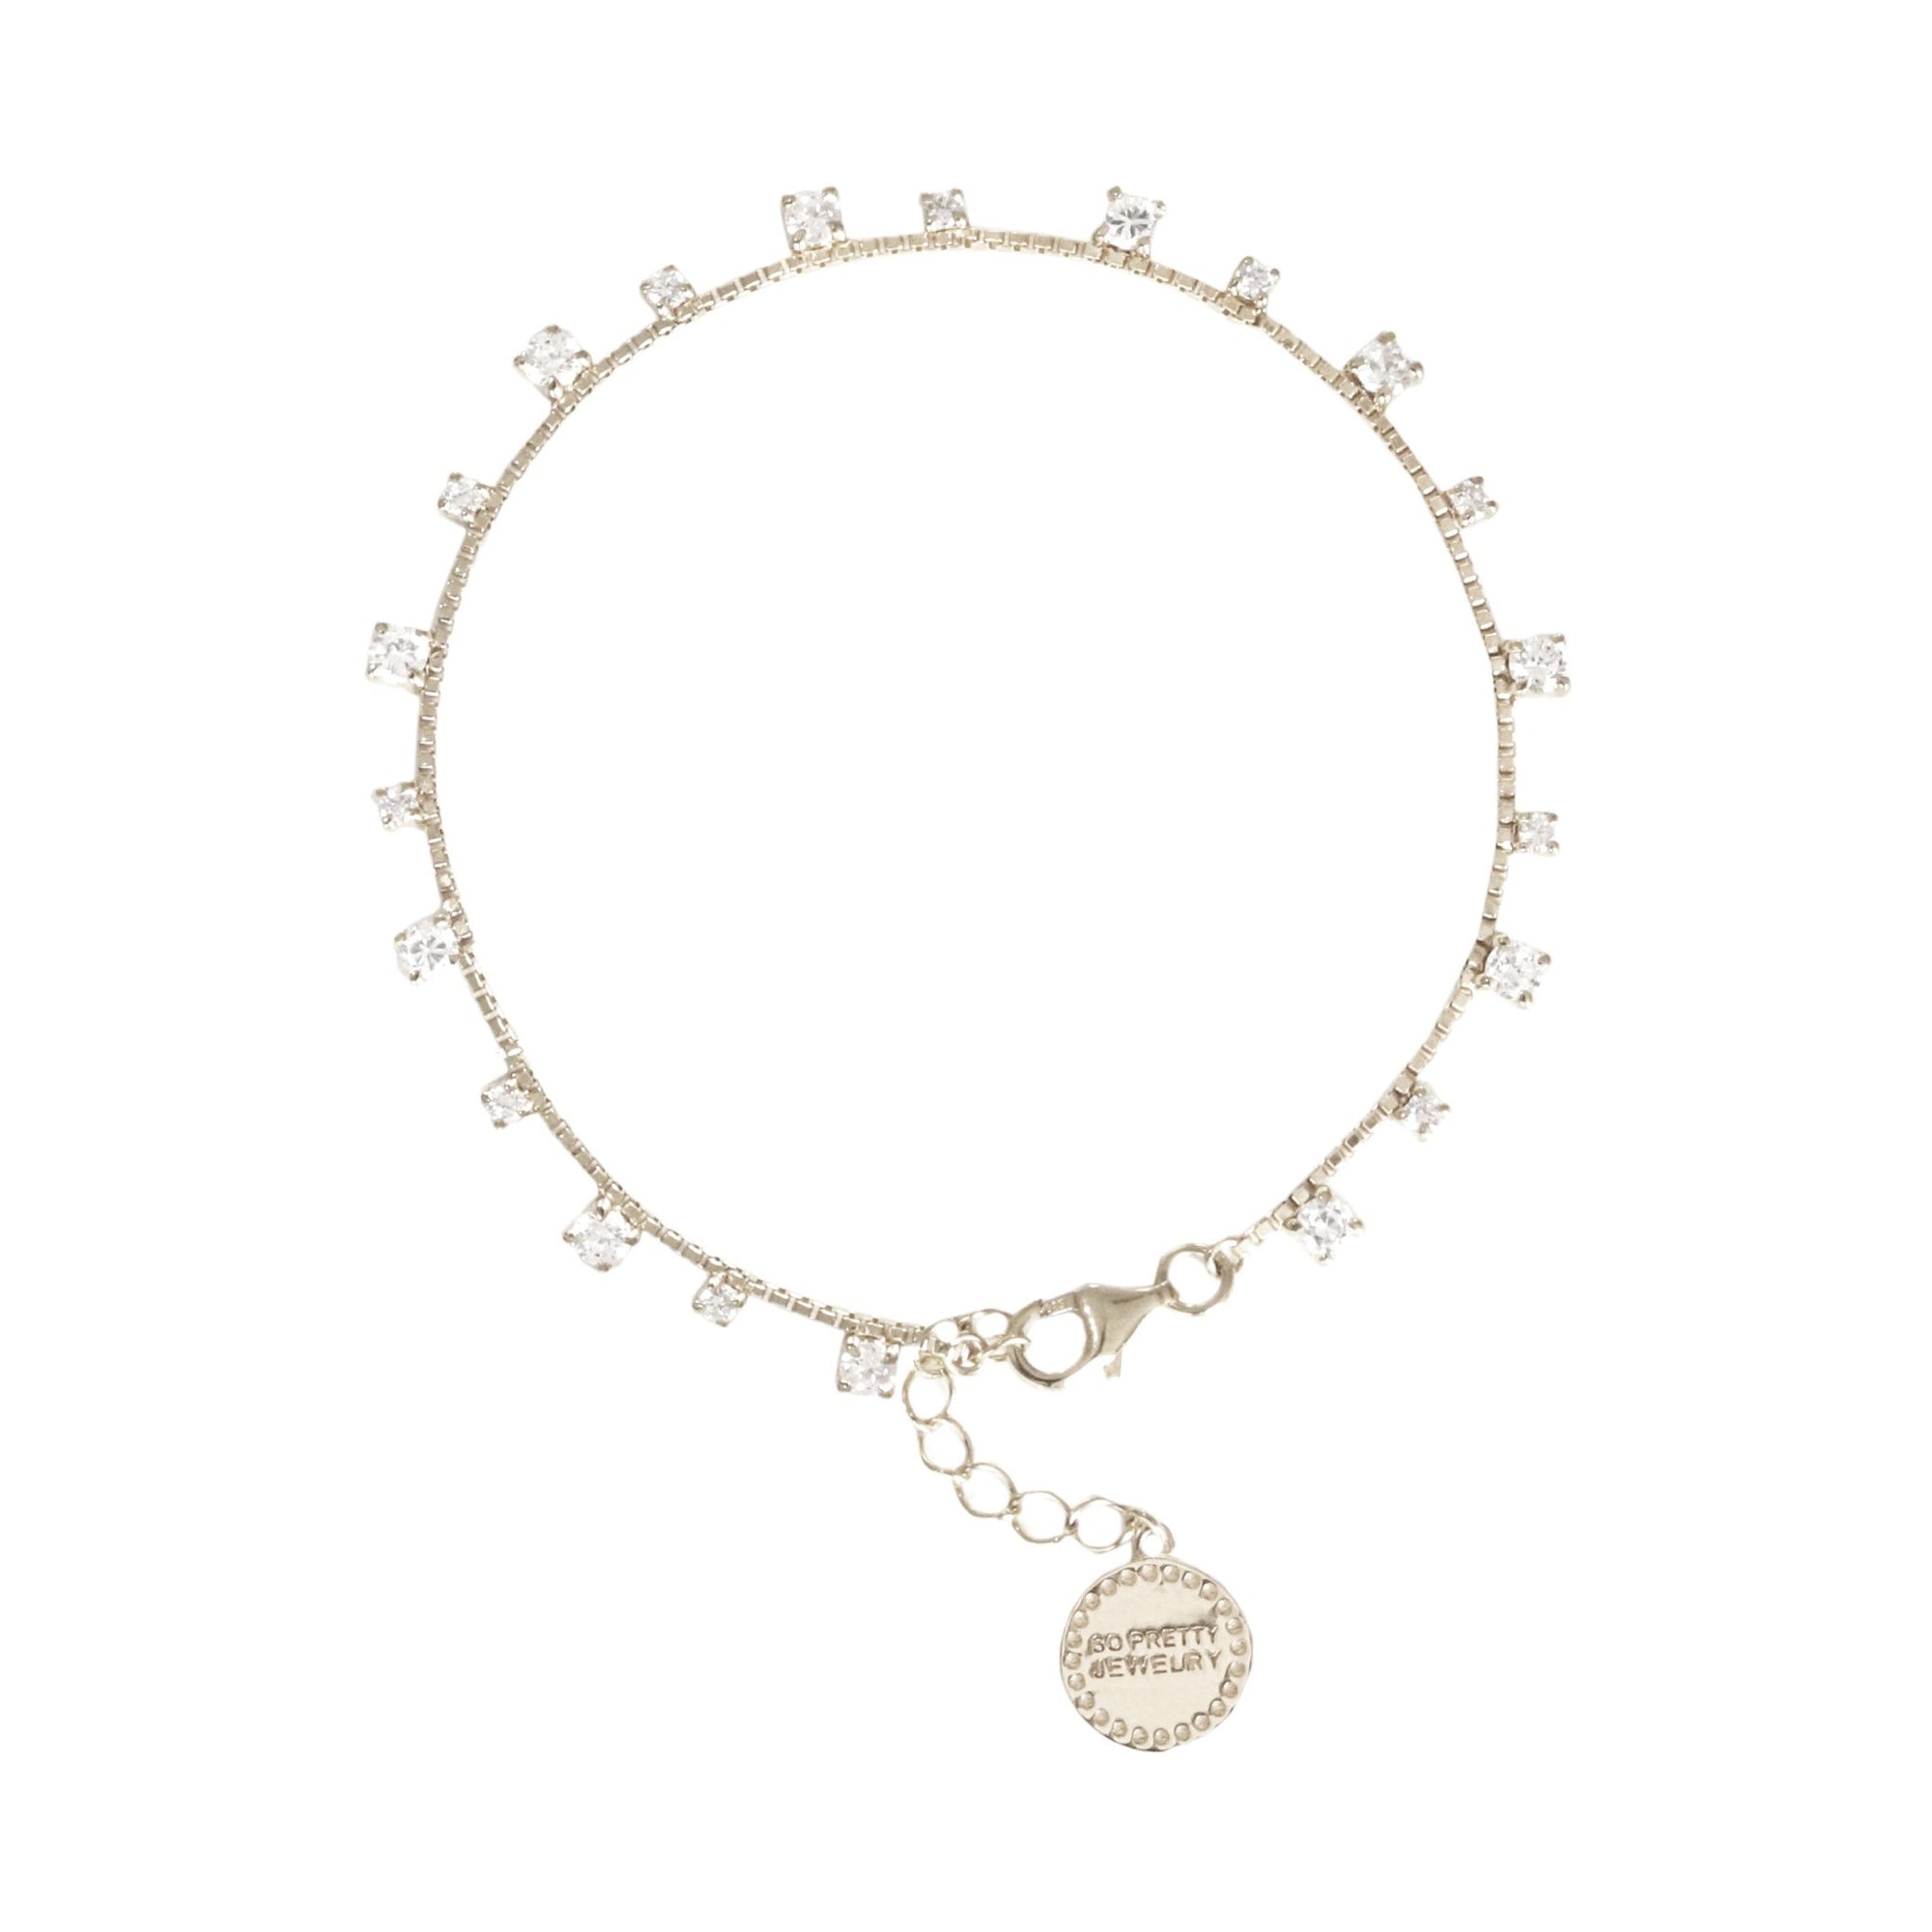 SCATTERED LOVE BRACELET - CUBIC ZIRCONIA & SILVER - SO PRETTY CARA COTTER